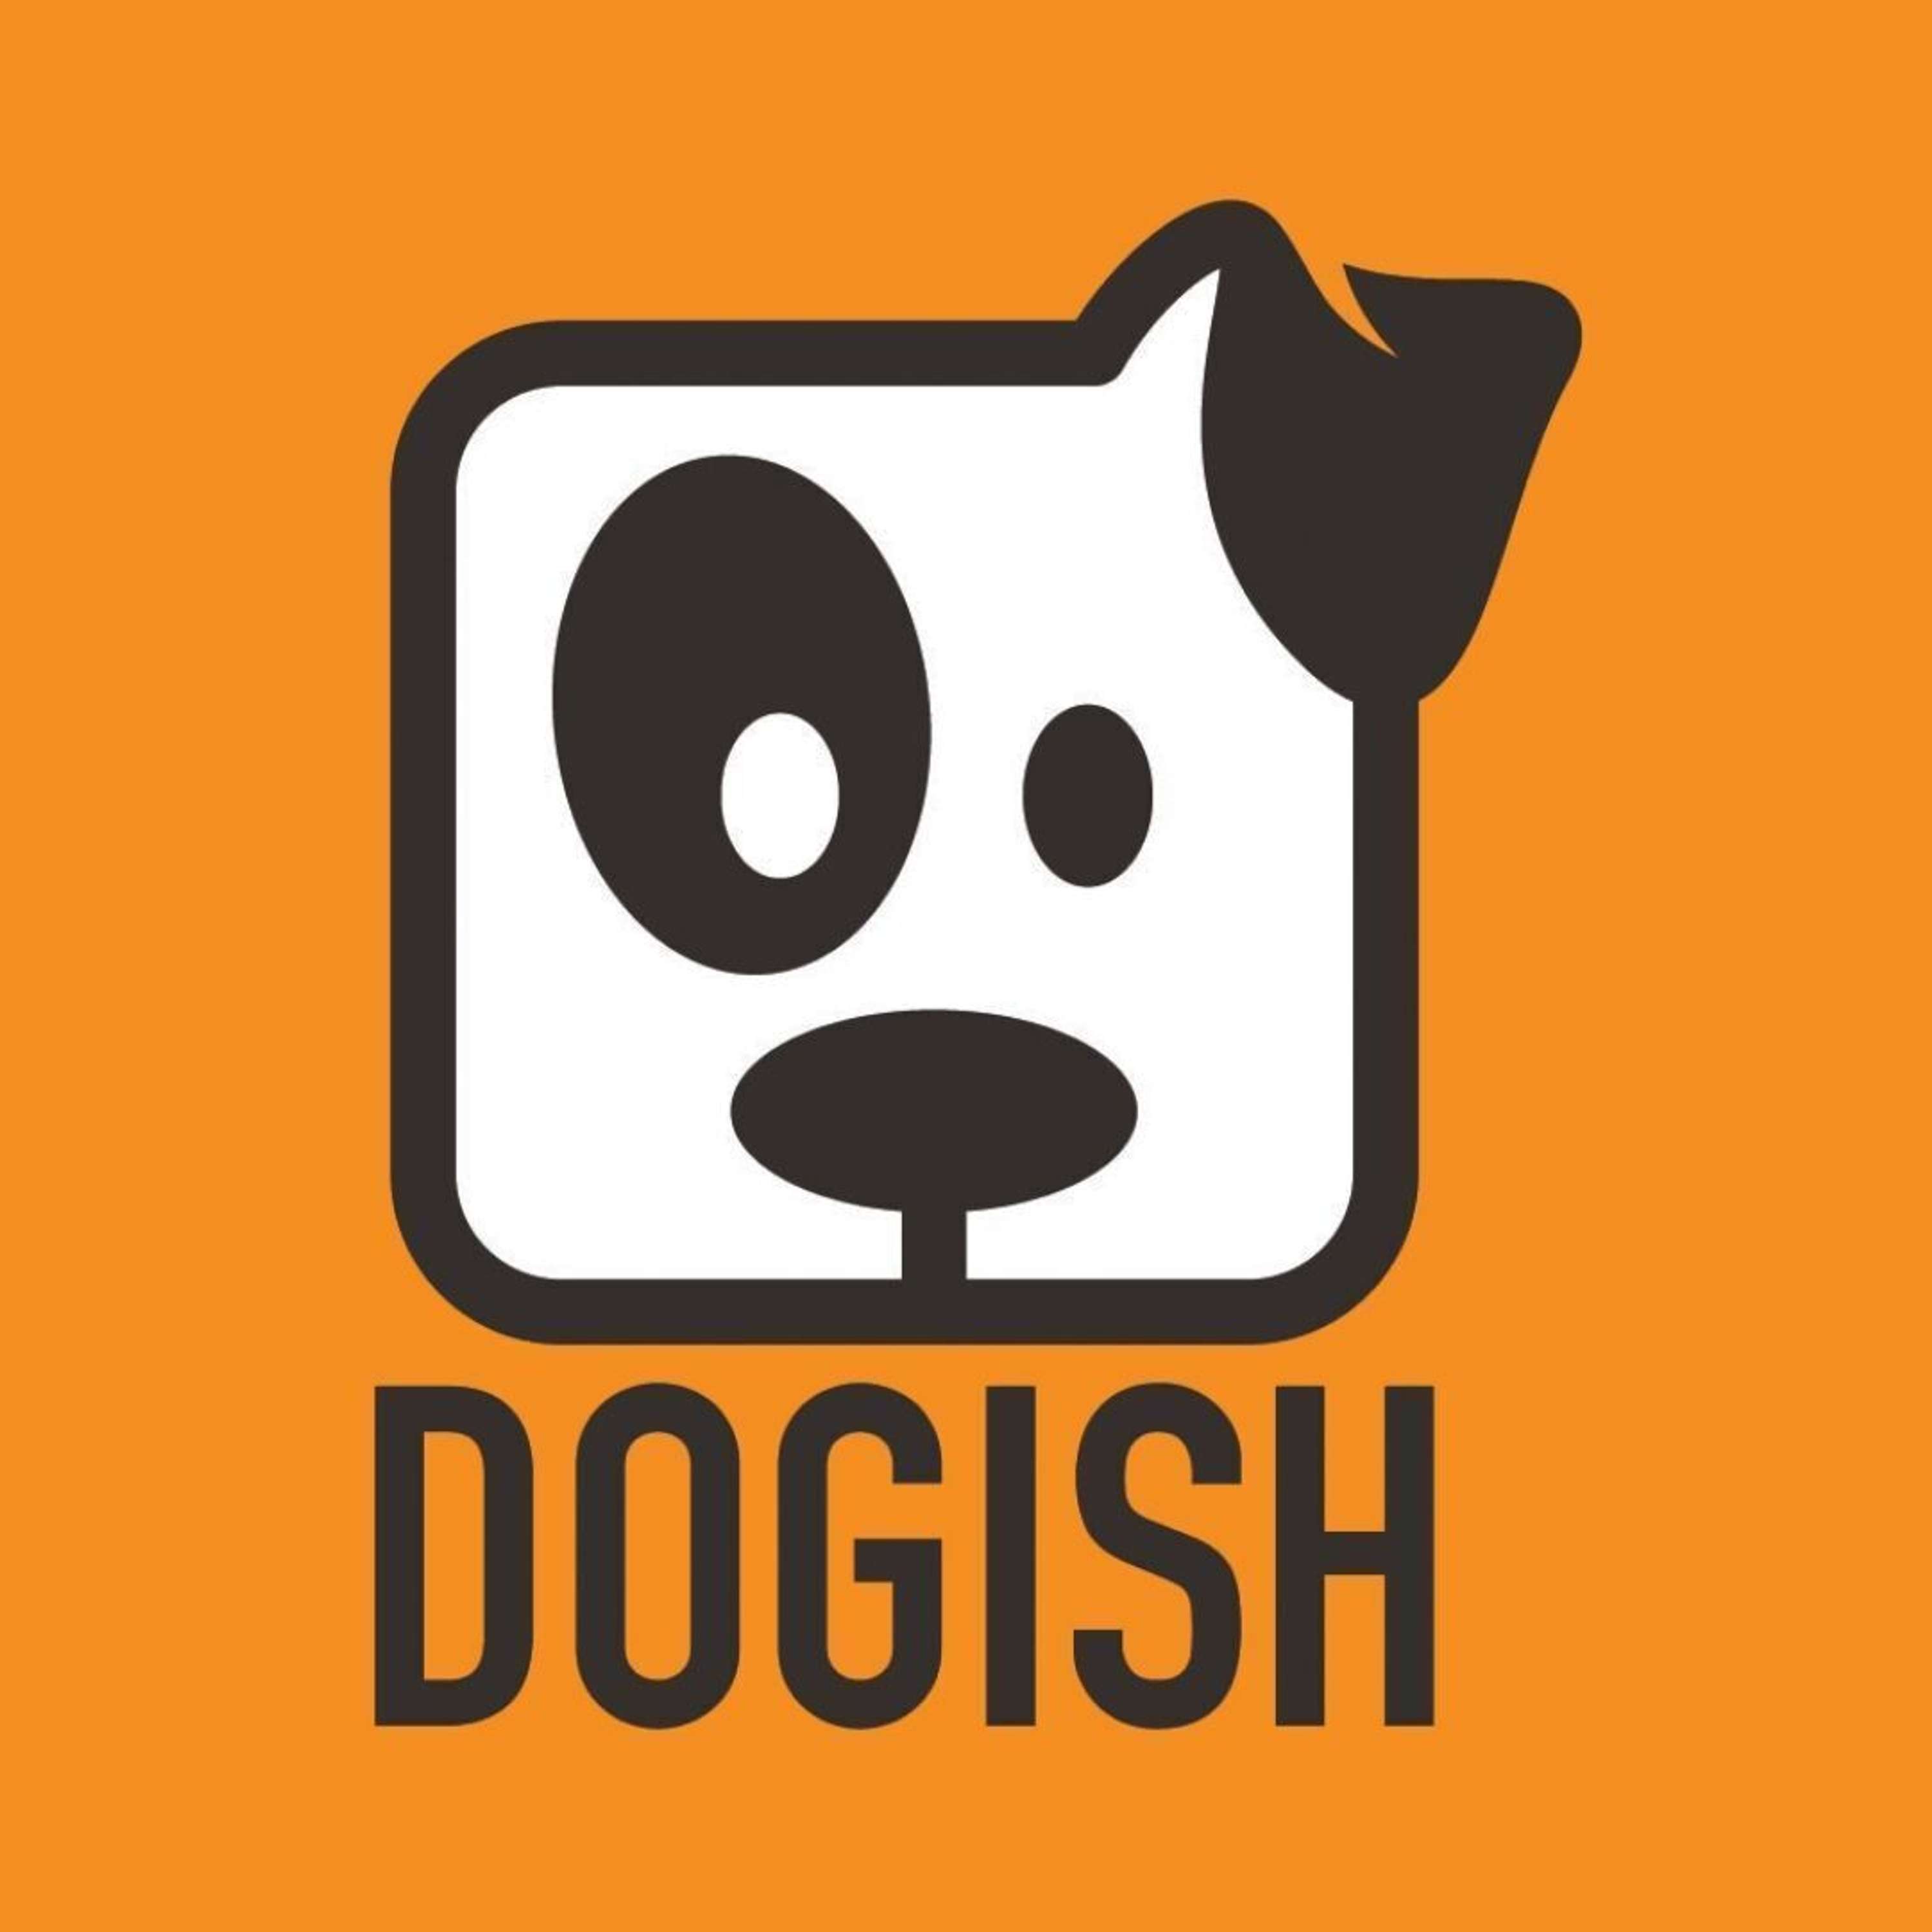 Dogish Podcast - Stuck In Prison & Afghanistan with Zach Skow 08/31/21